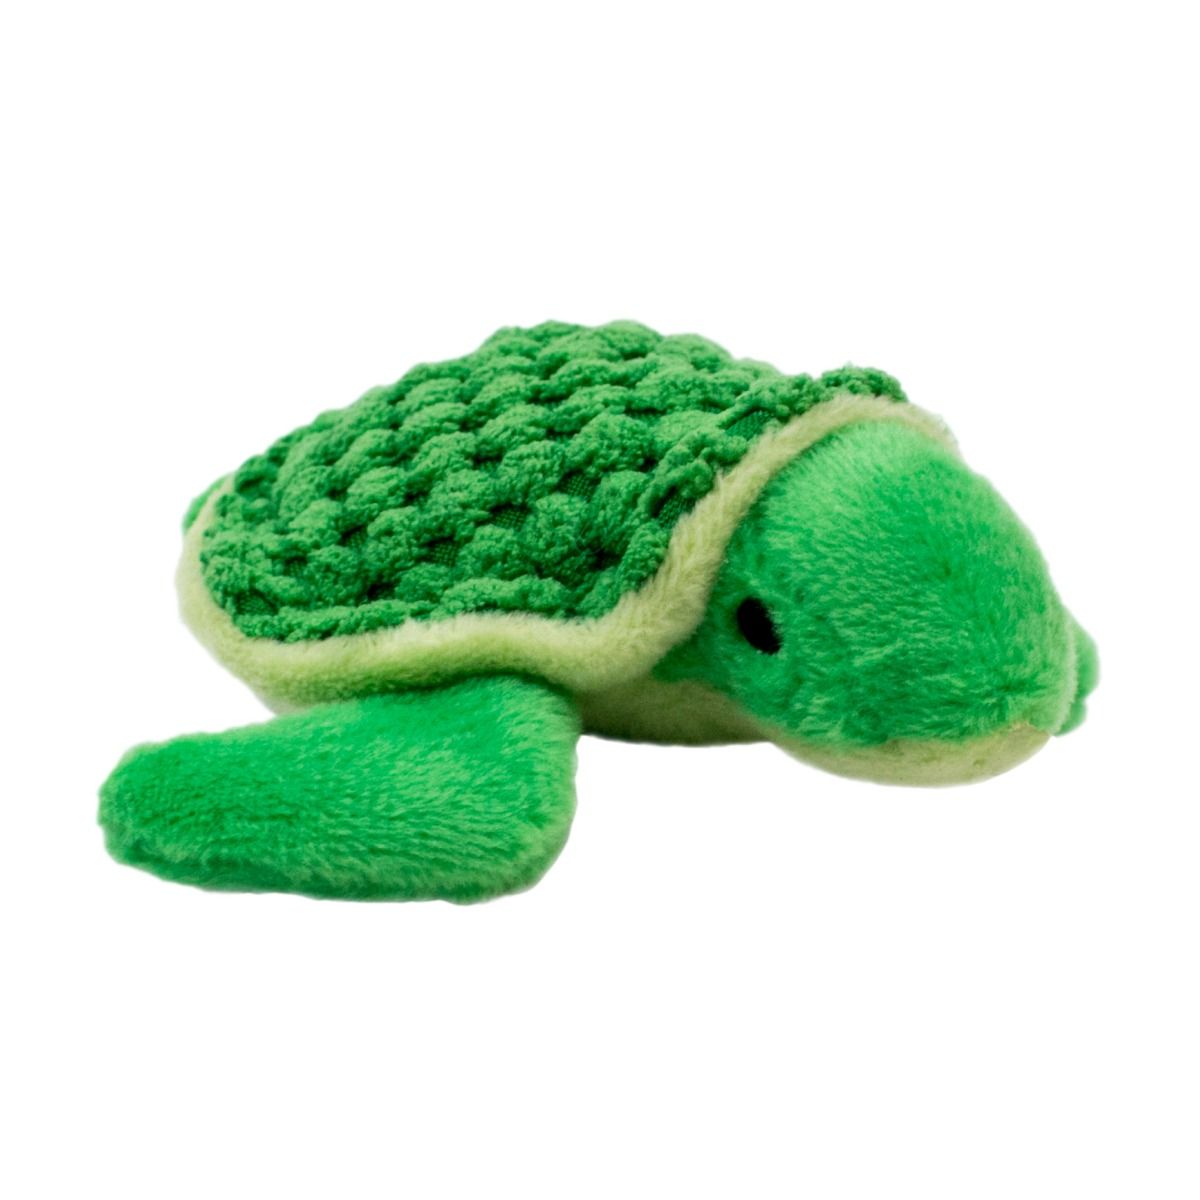 Tall Tails Plush Turtle Squeaker Toy 4"